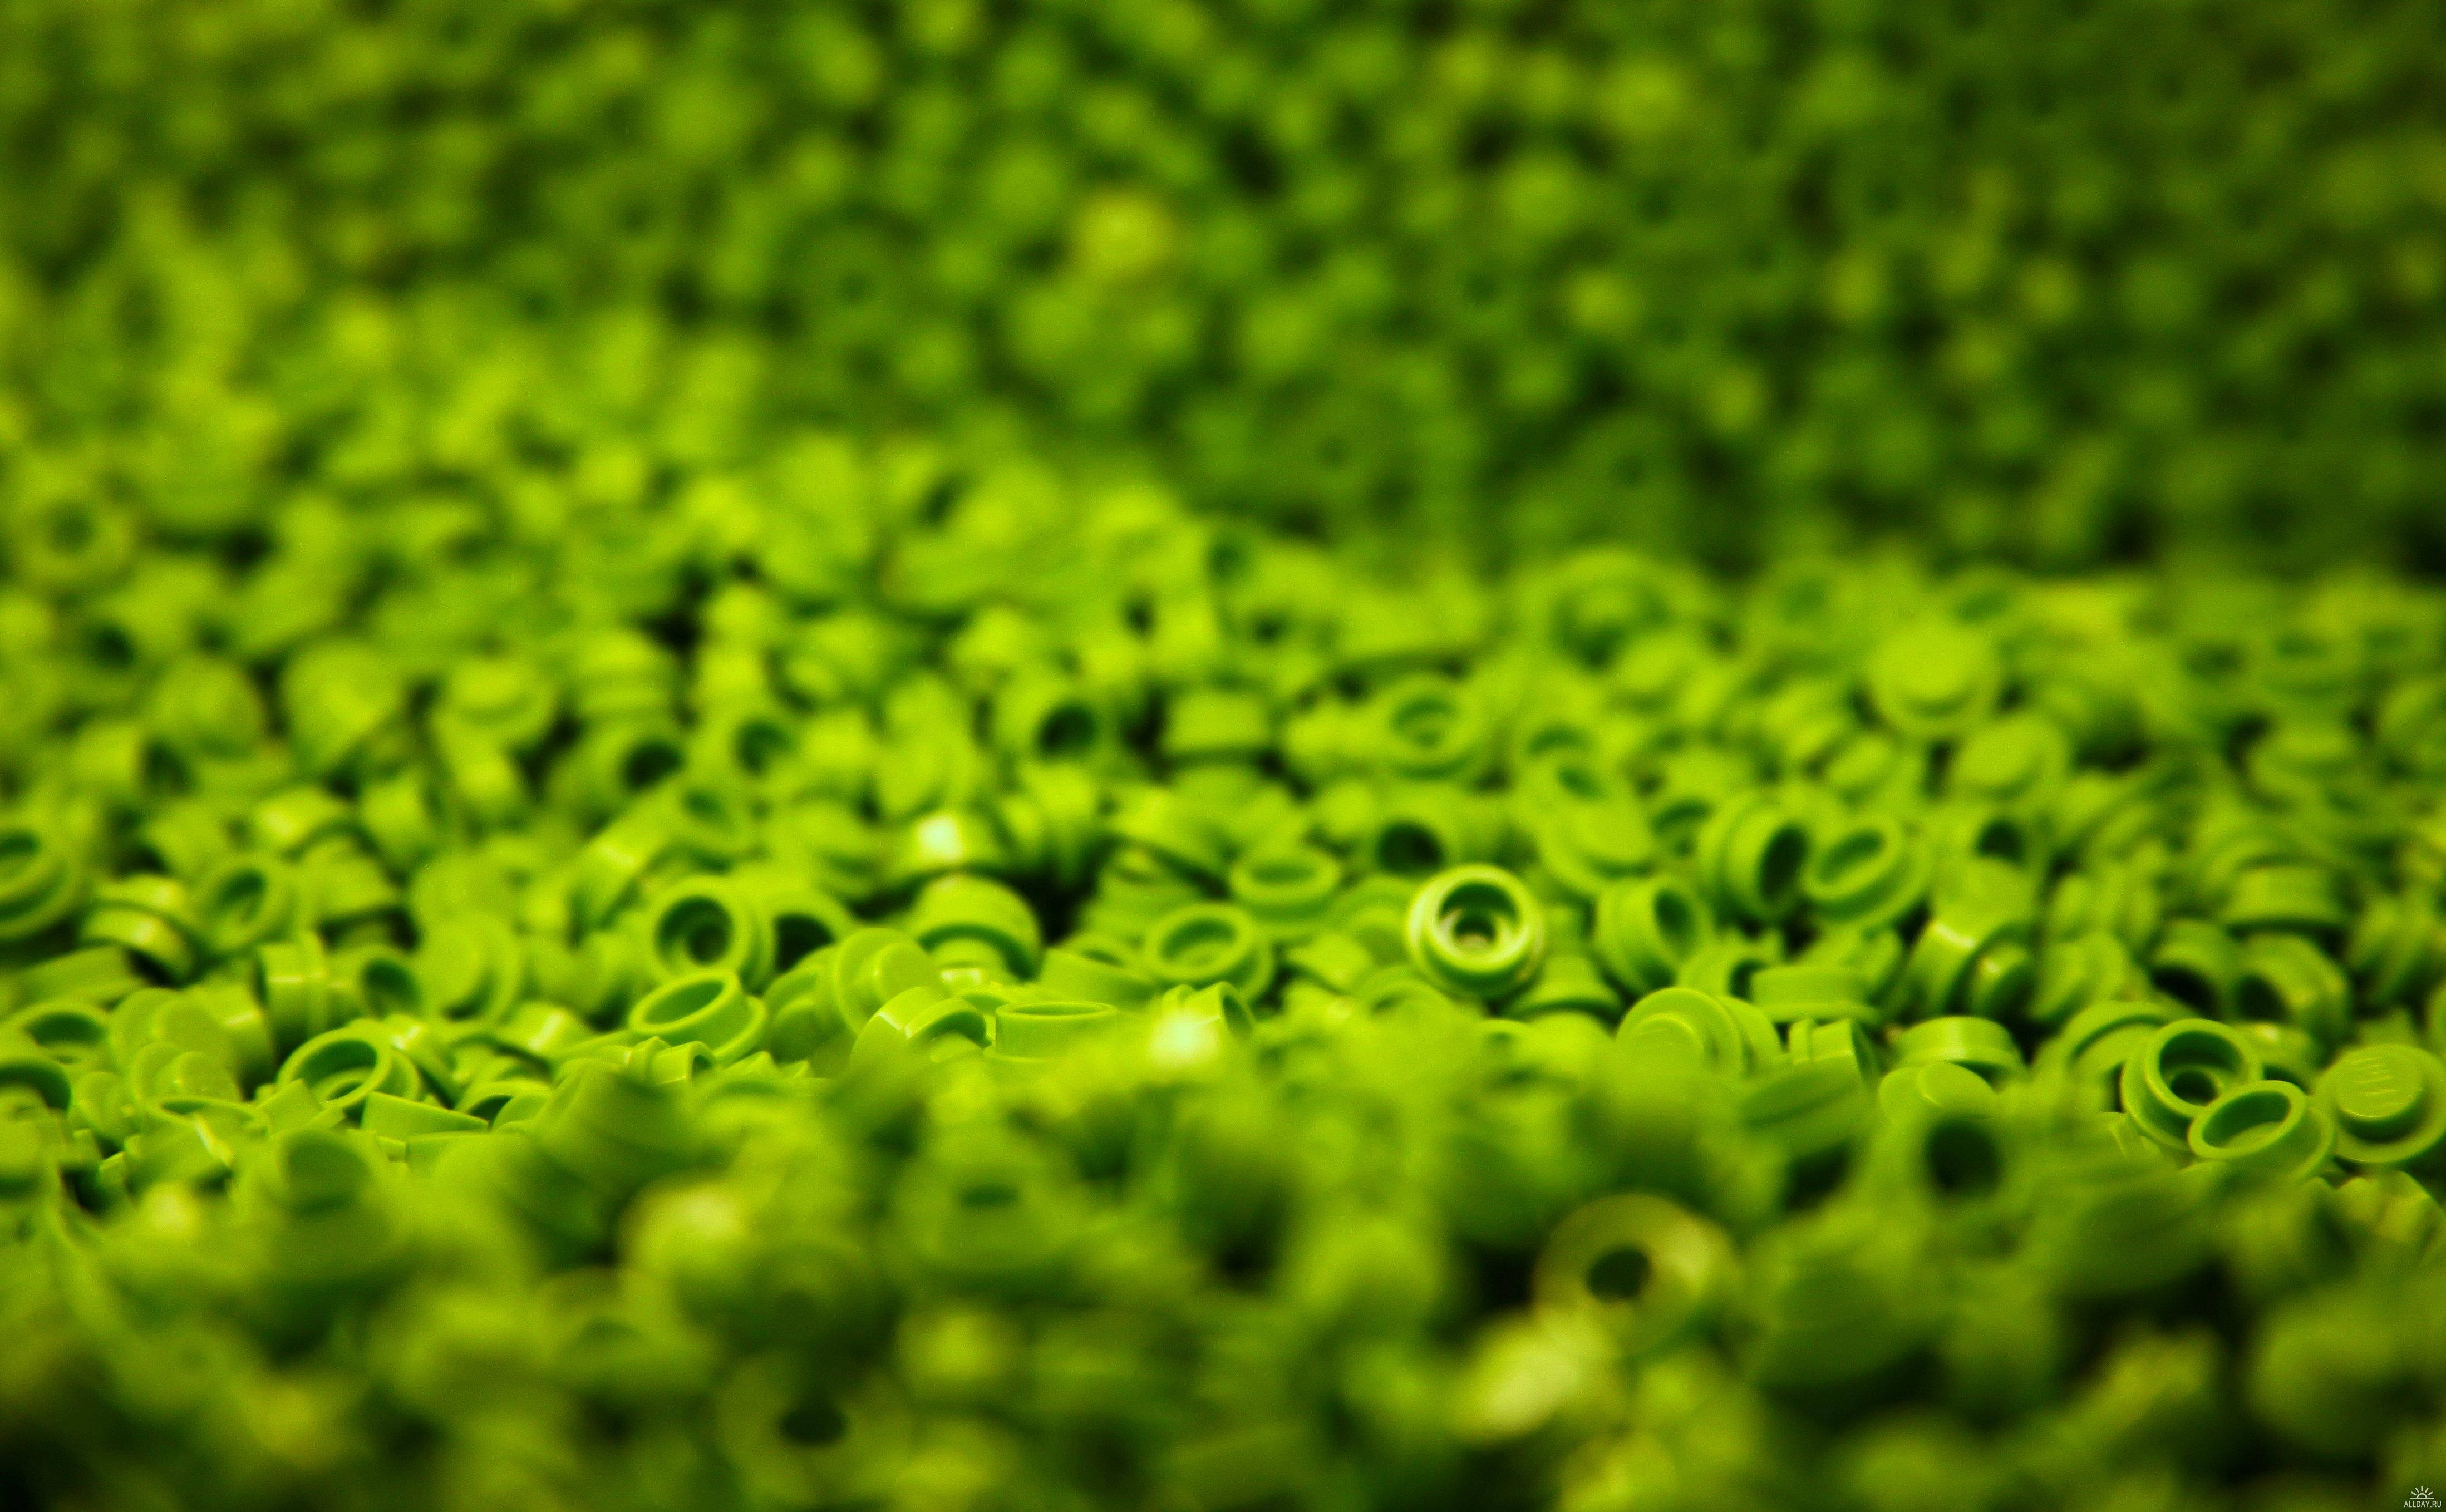 4k Green Lego Toy Pieces Wallpaper